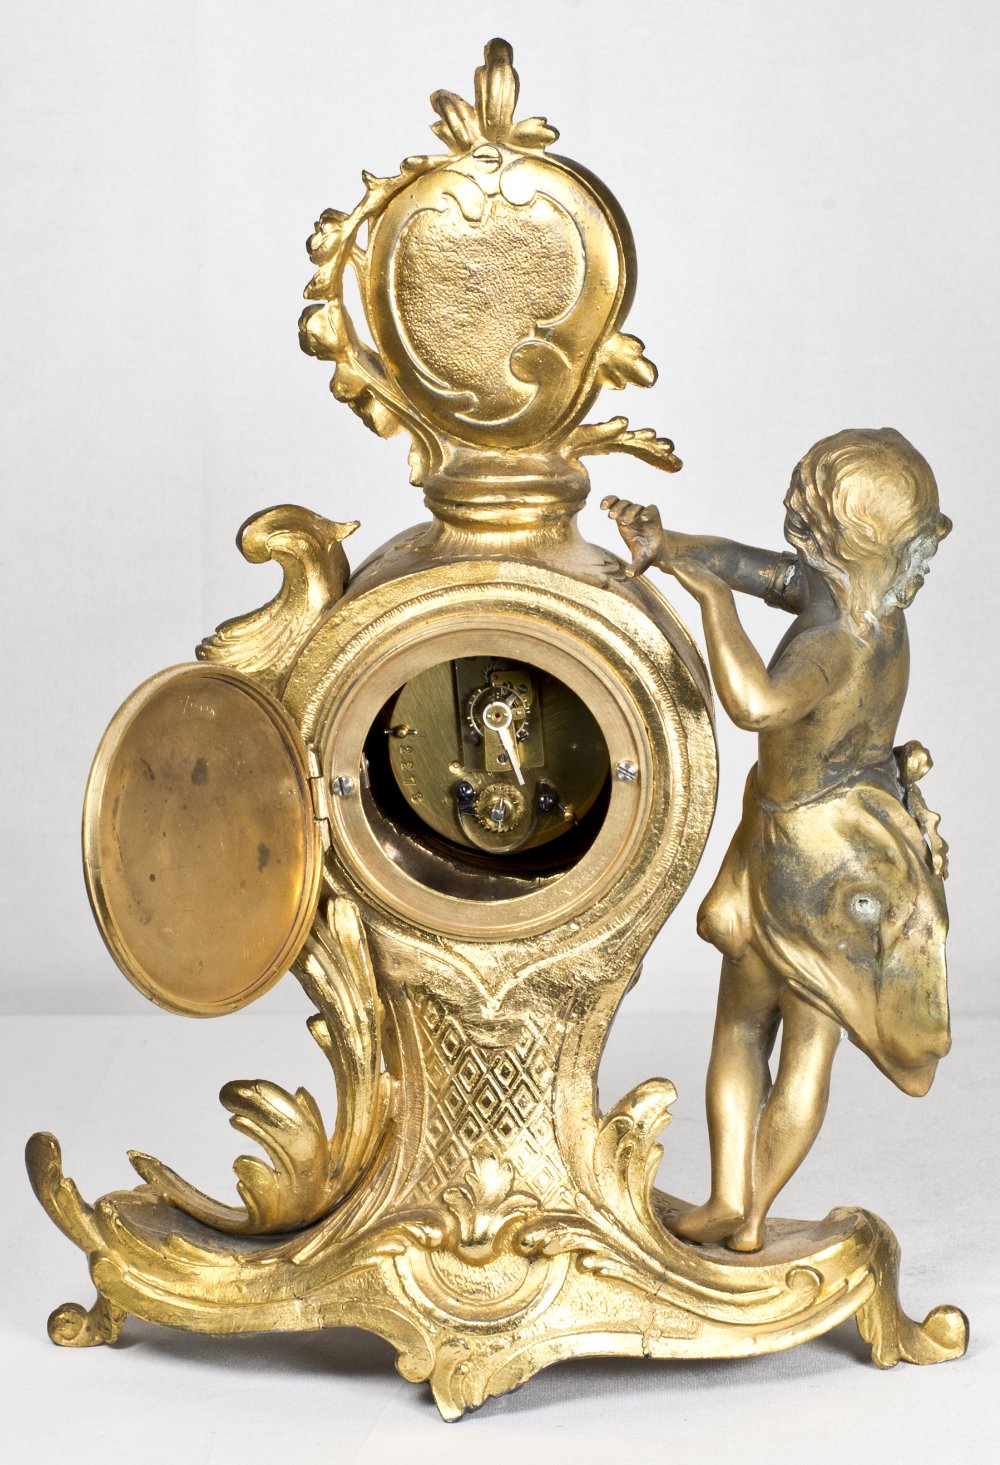 A 19th Century mantel clock with white enamel dial, in a gilded spelter case, the top inset portrait - Image 5 of 5